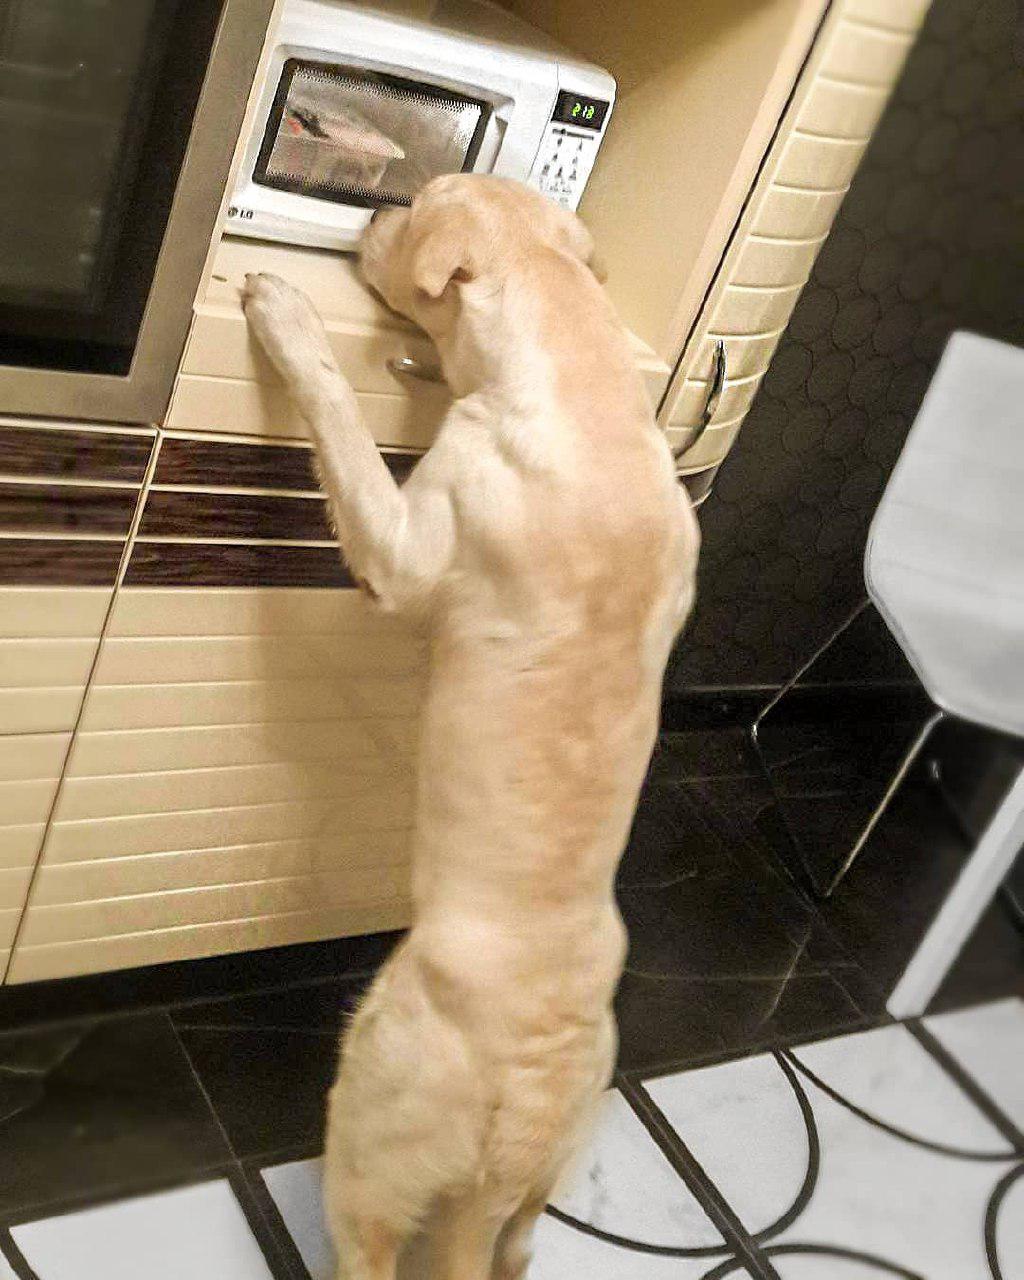 A yellow Labrador Retriever standing and leaning against the cabinet while staring at the microwave on top of it